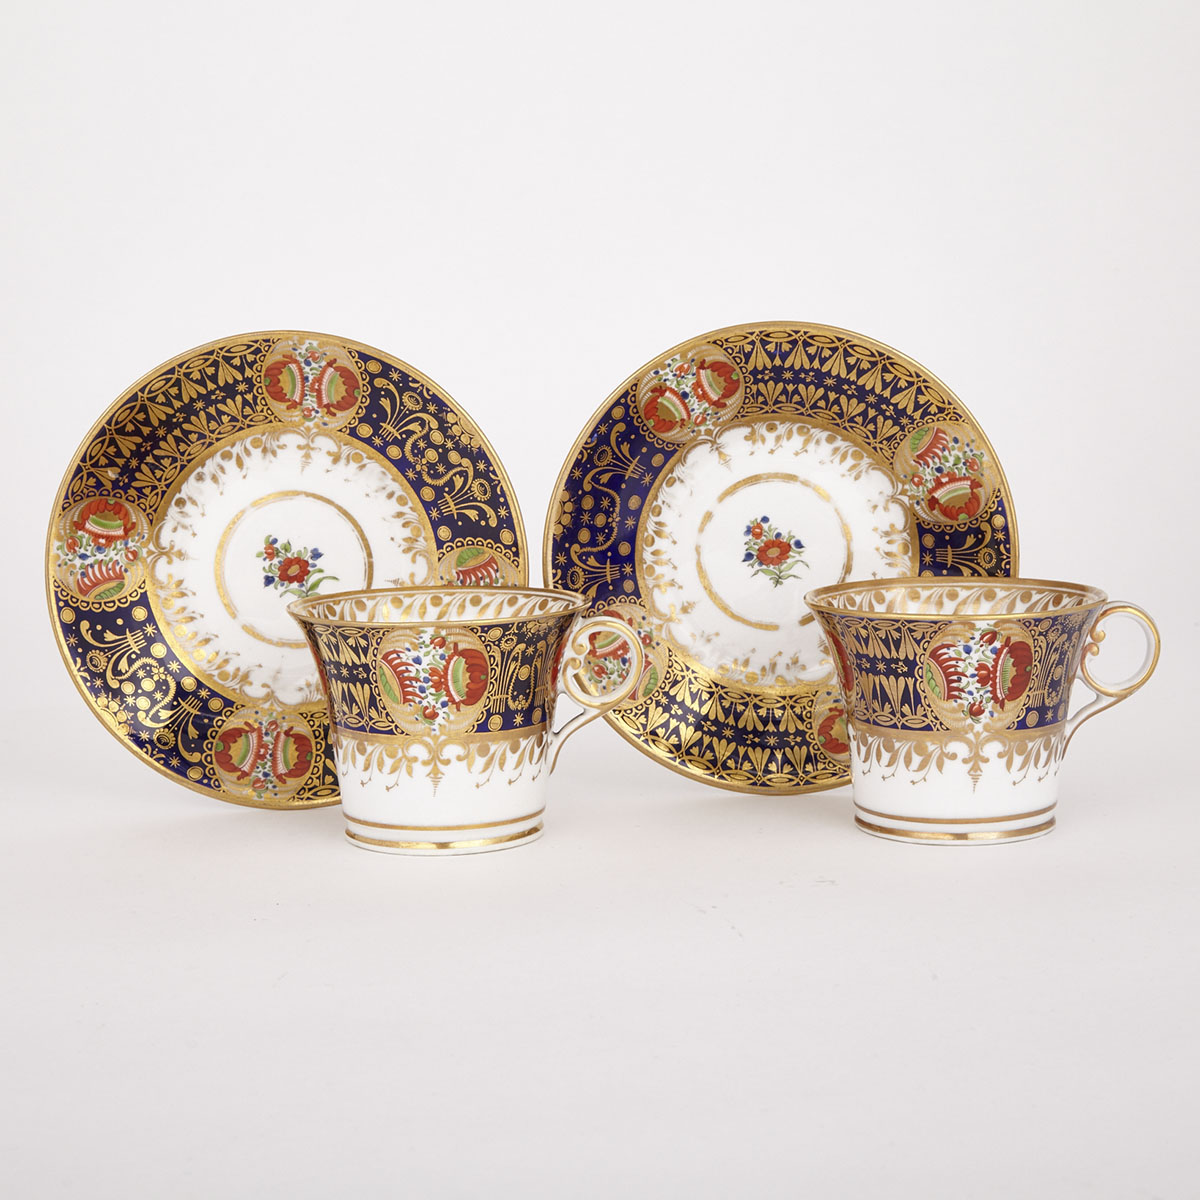 Pair of Chamberlain’s Japan Coffee Cups and Saucers, c.1815